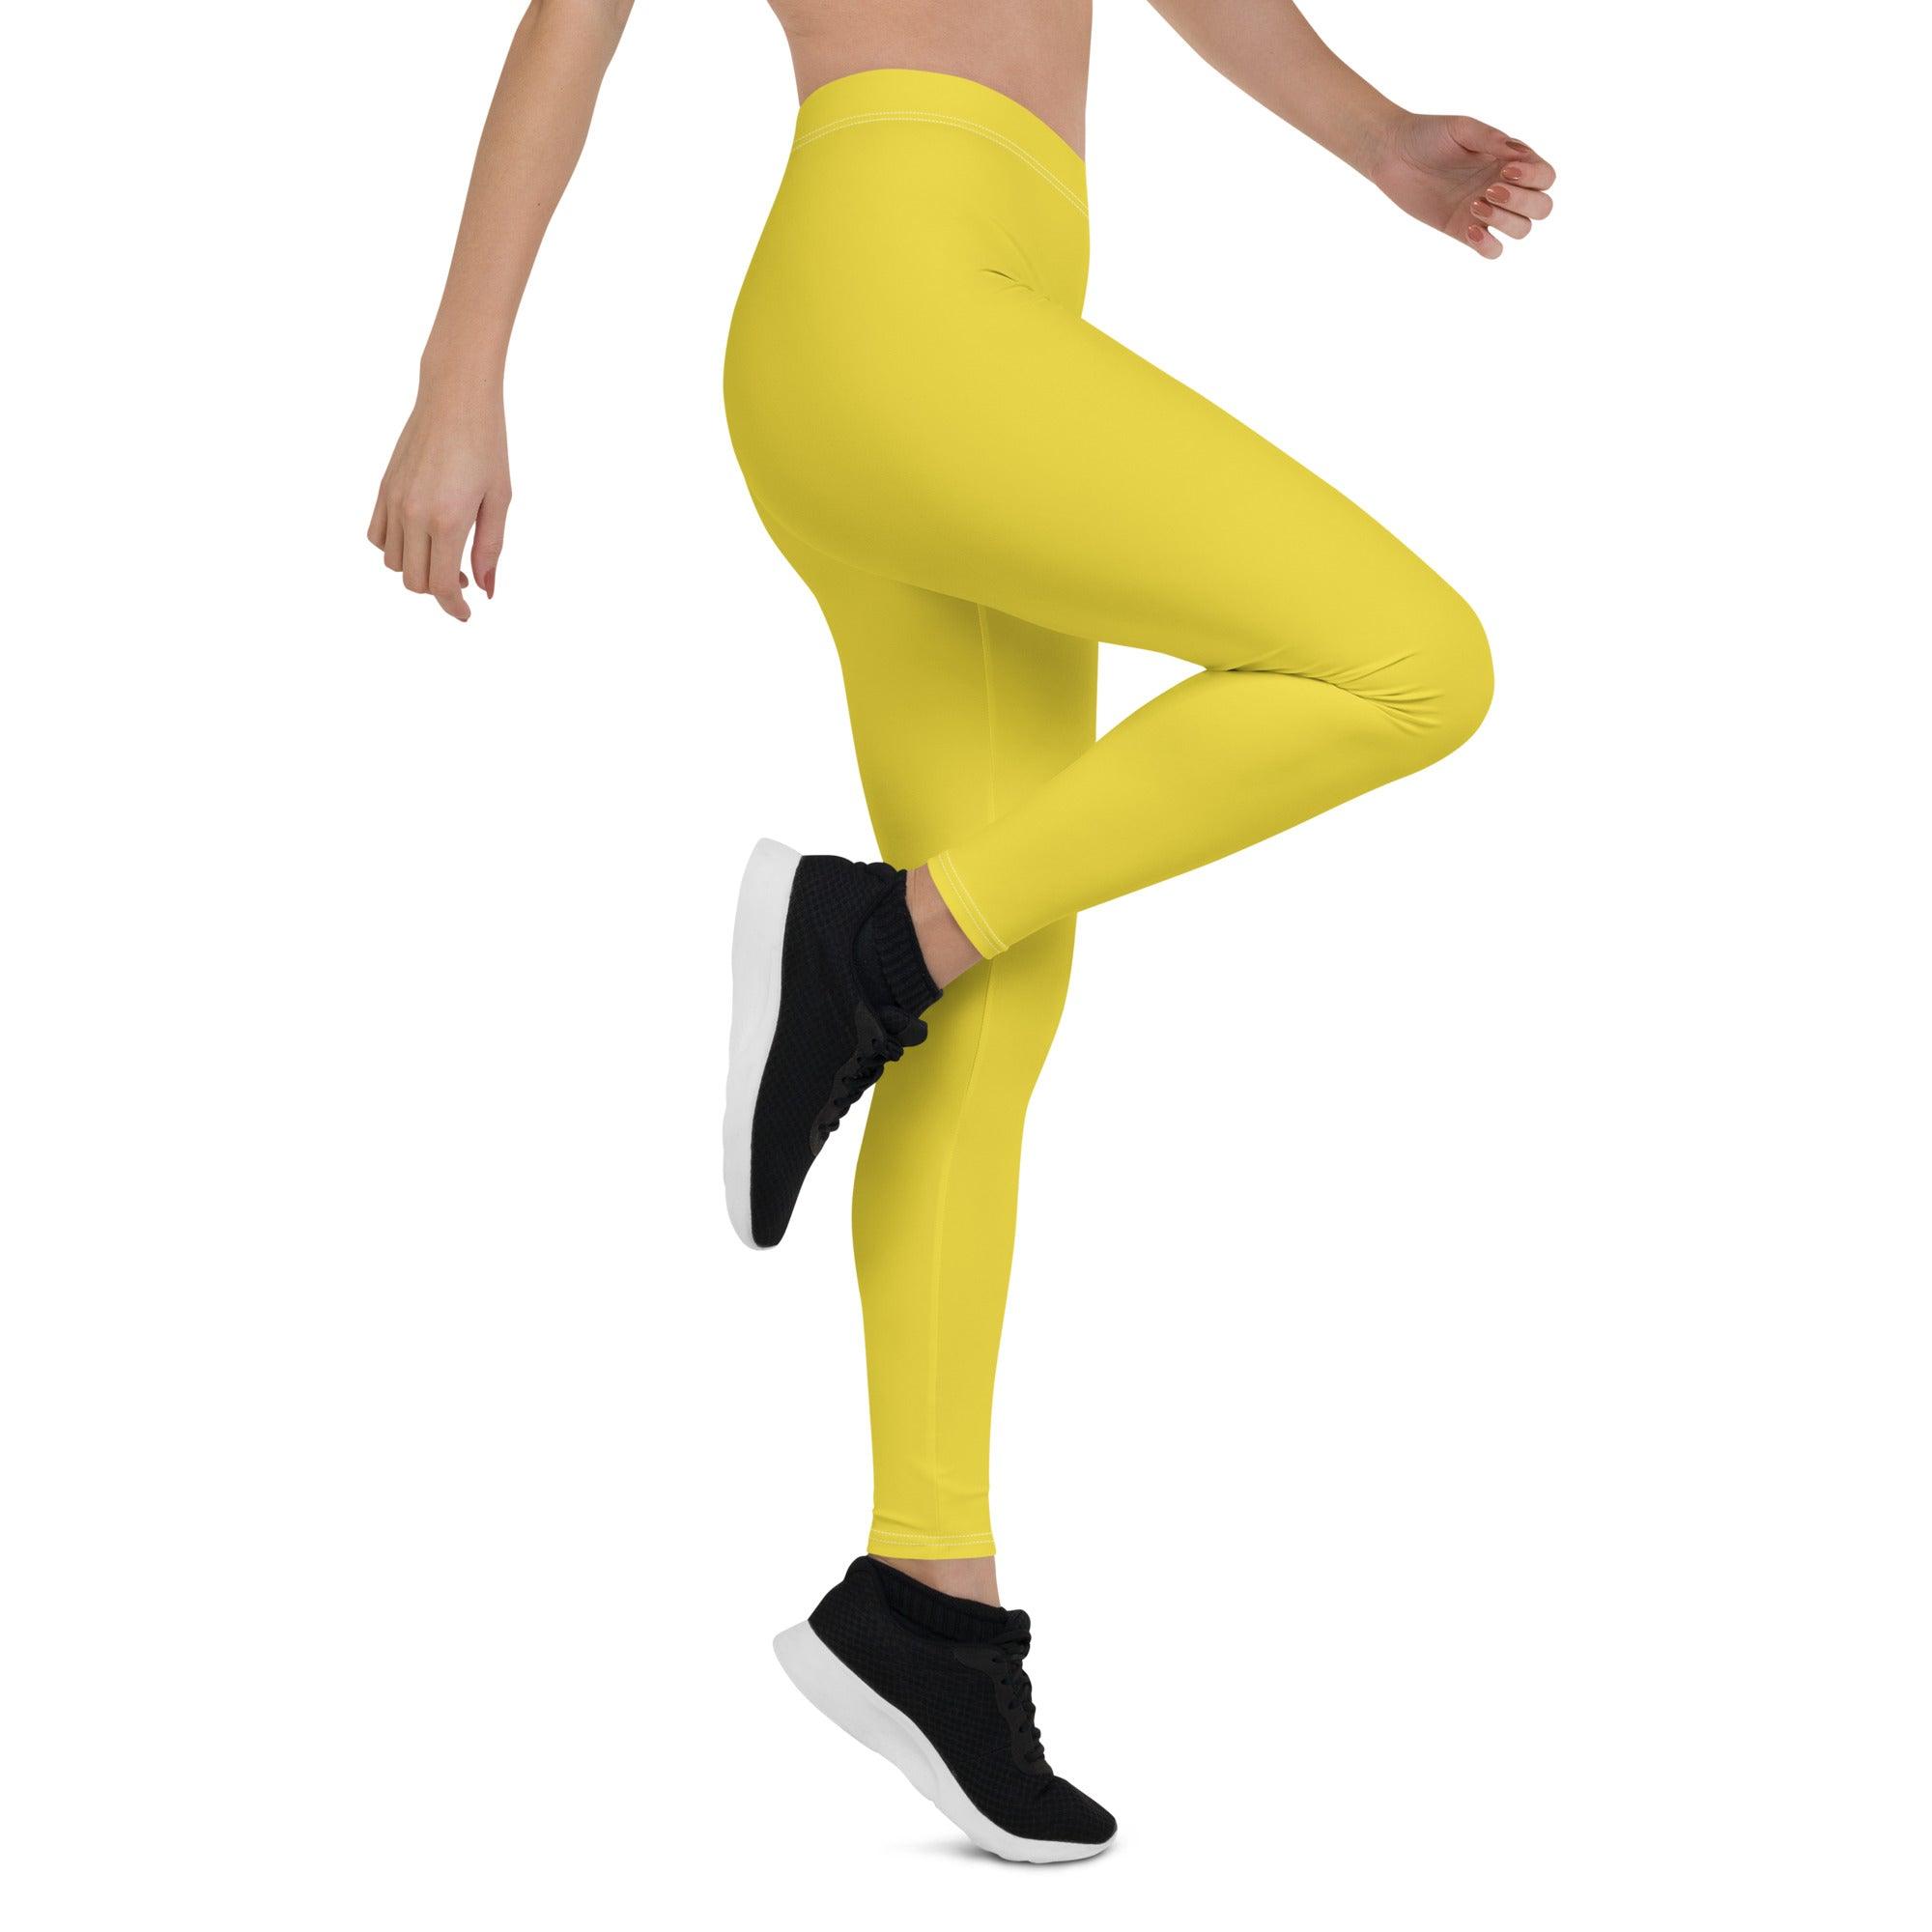 Inela Dream Yellow Mid-Rise Leggings Solid Workout Gym Women's Active Wear Vibrant